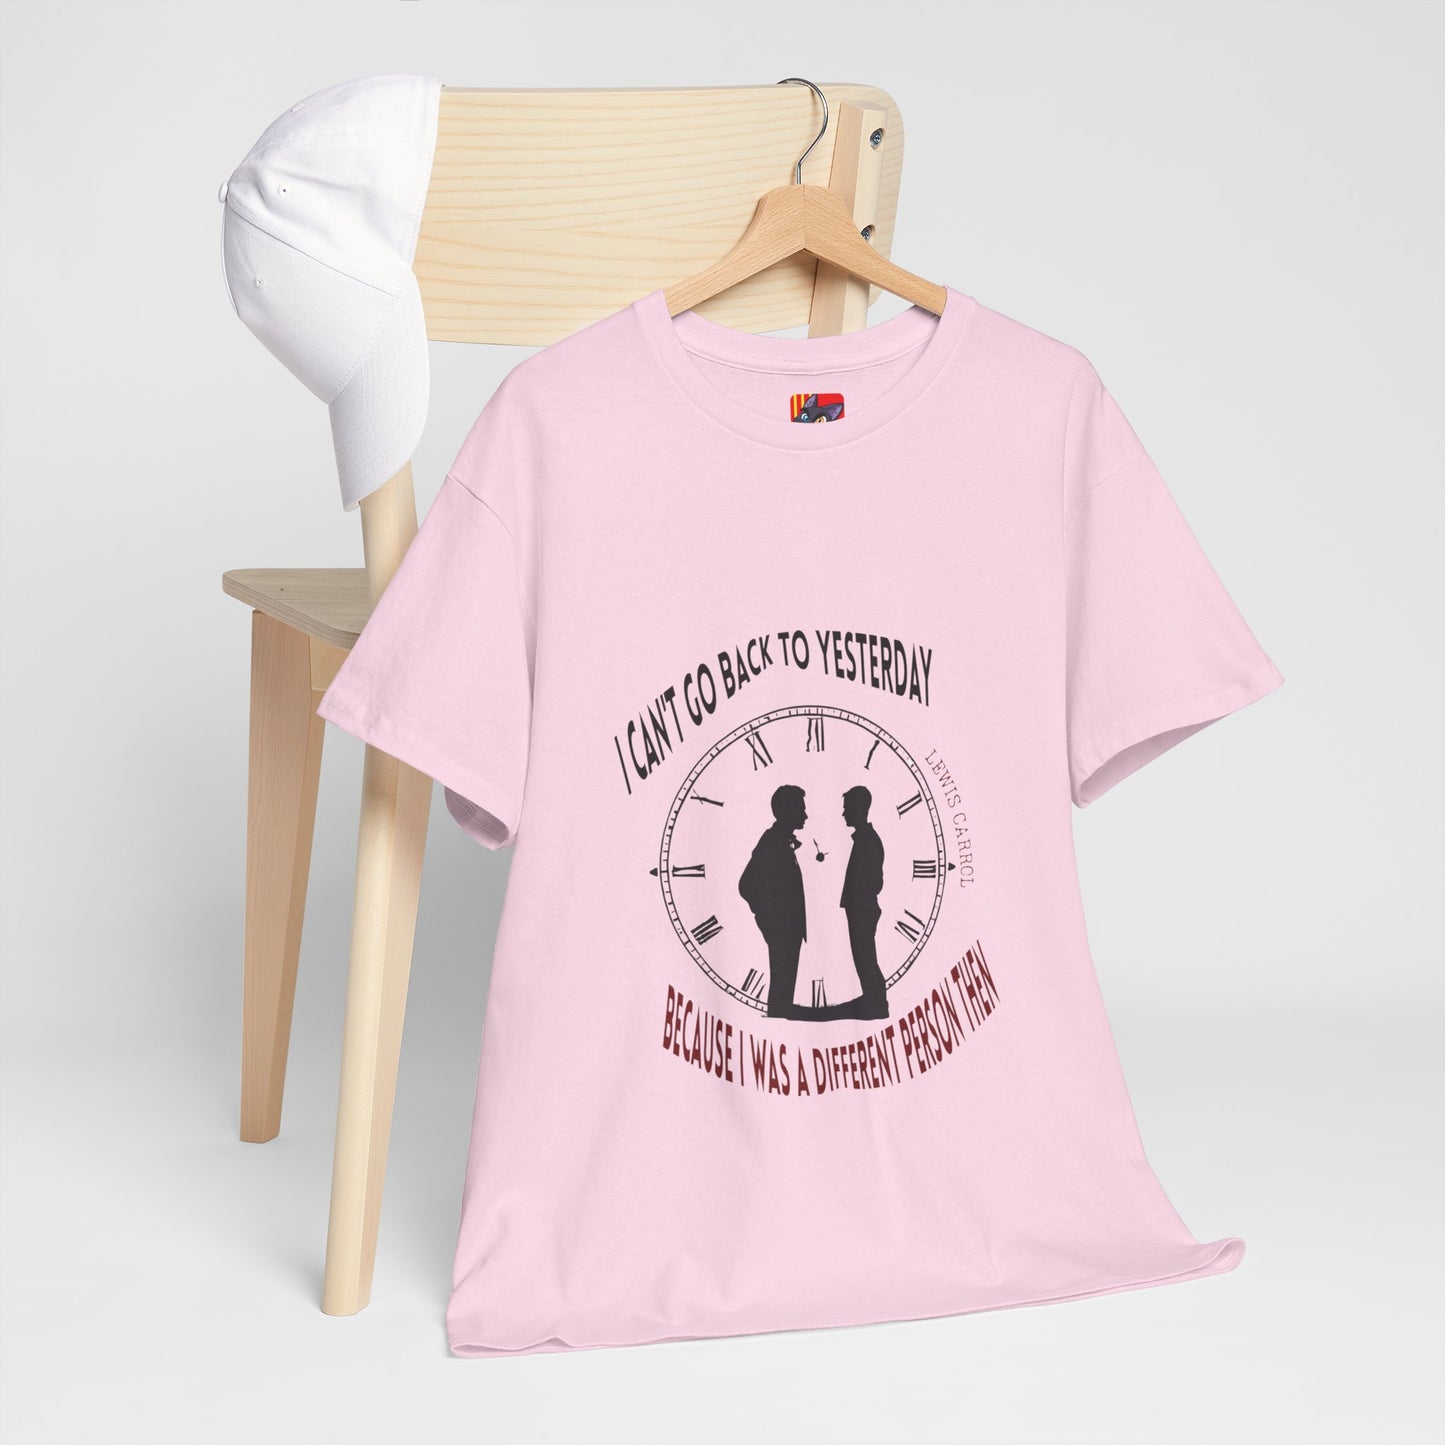 The Evolving Soul T-Shirt: Growth is Constant"Yesterday - a different person" Lewis Carrol